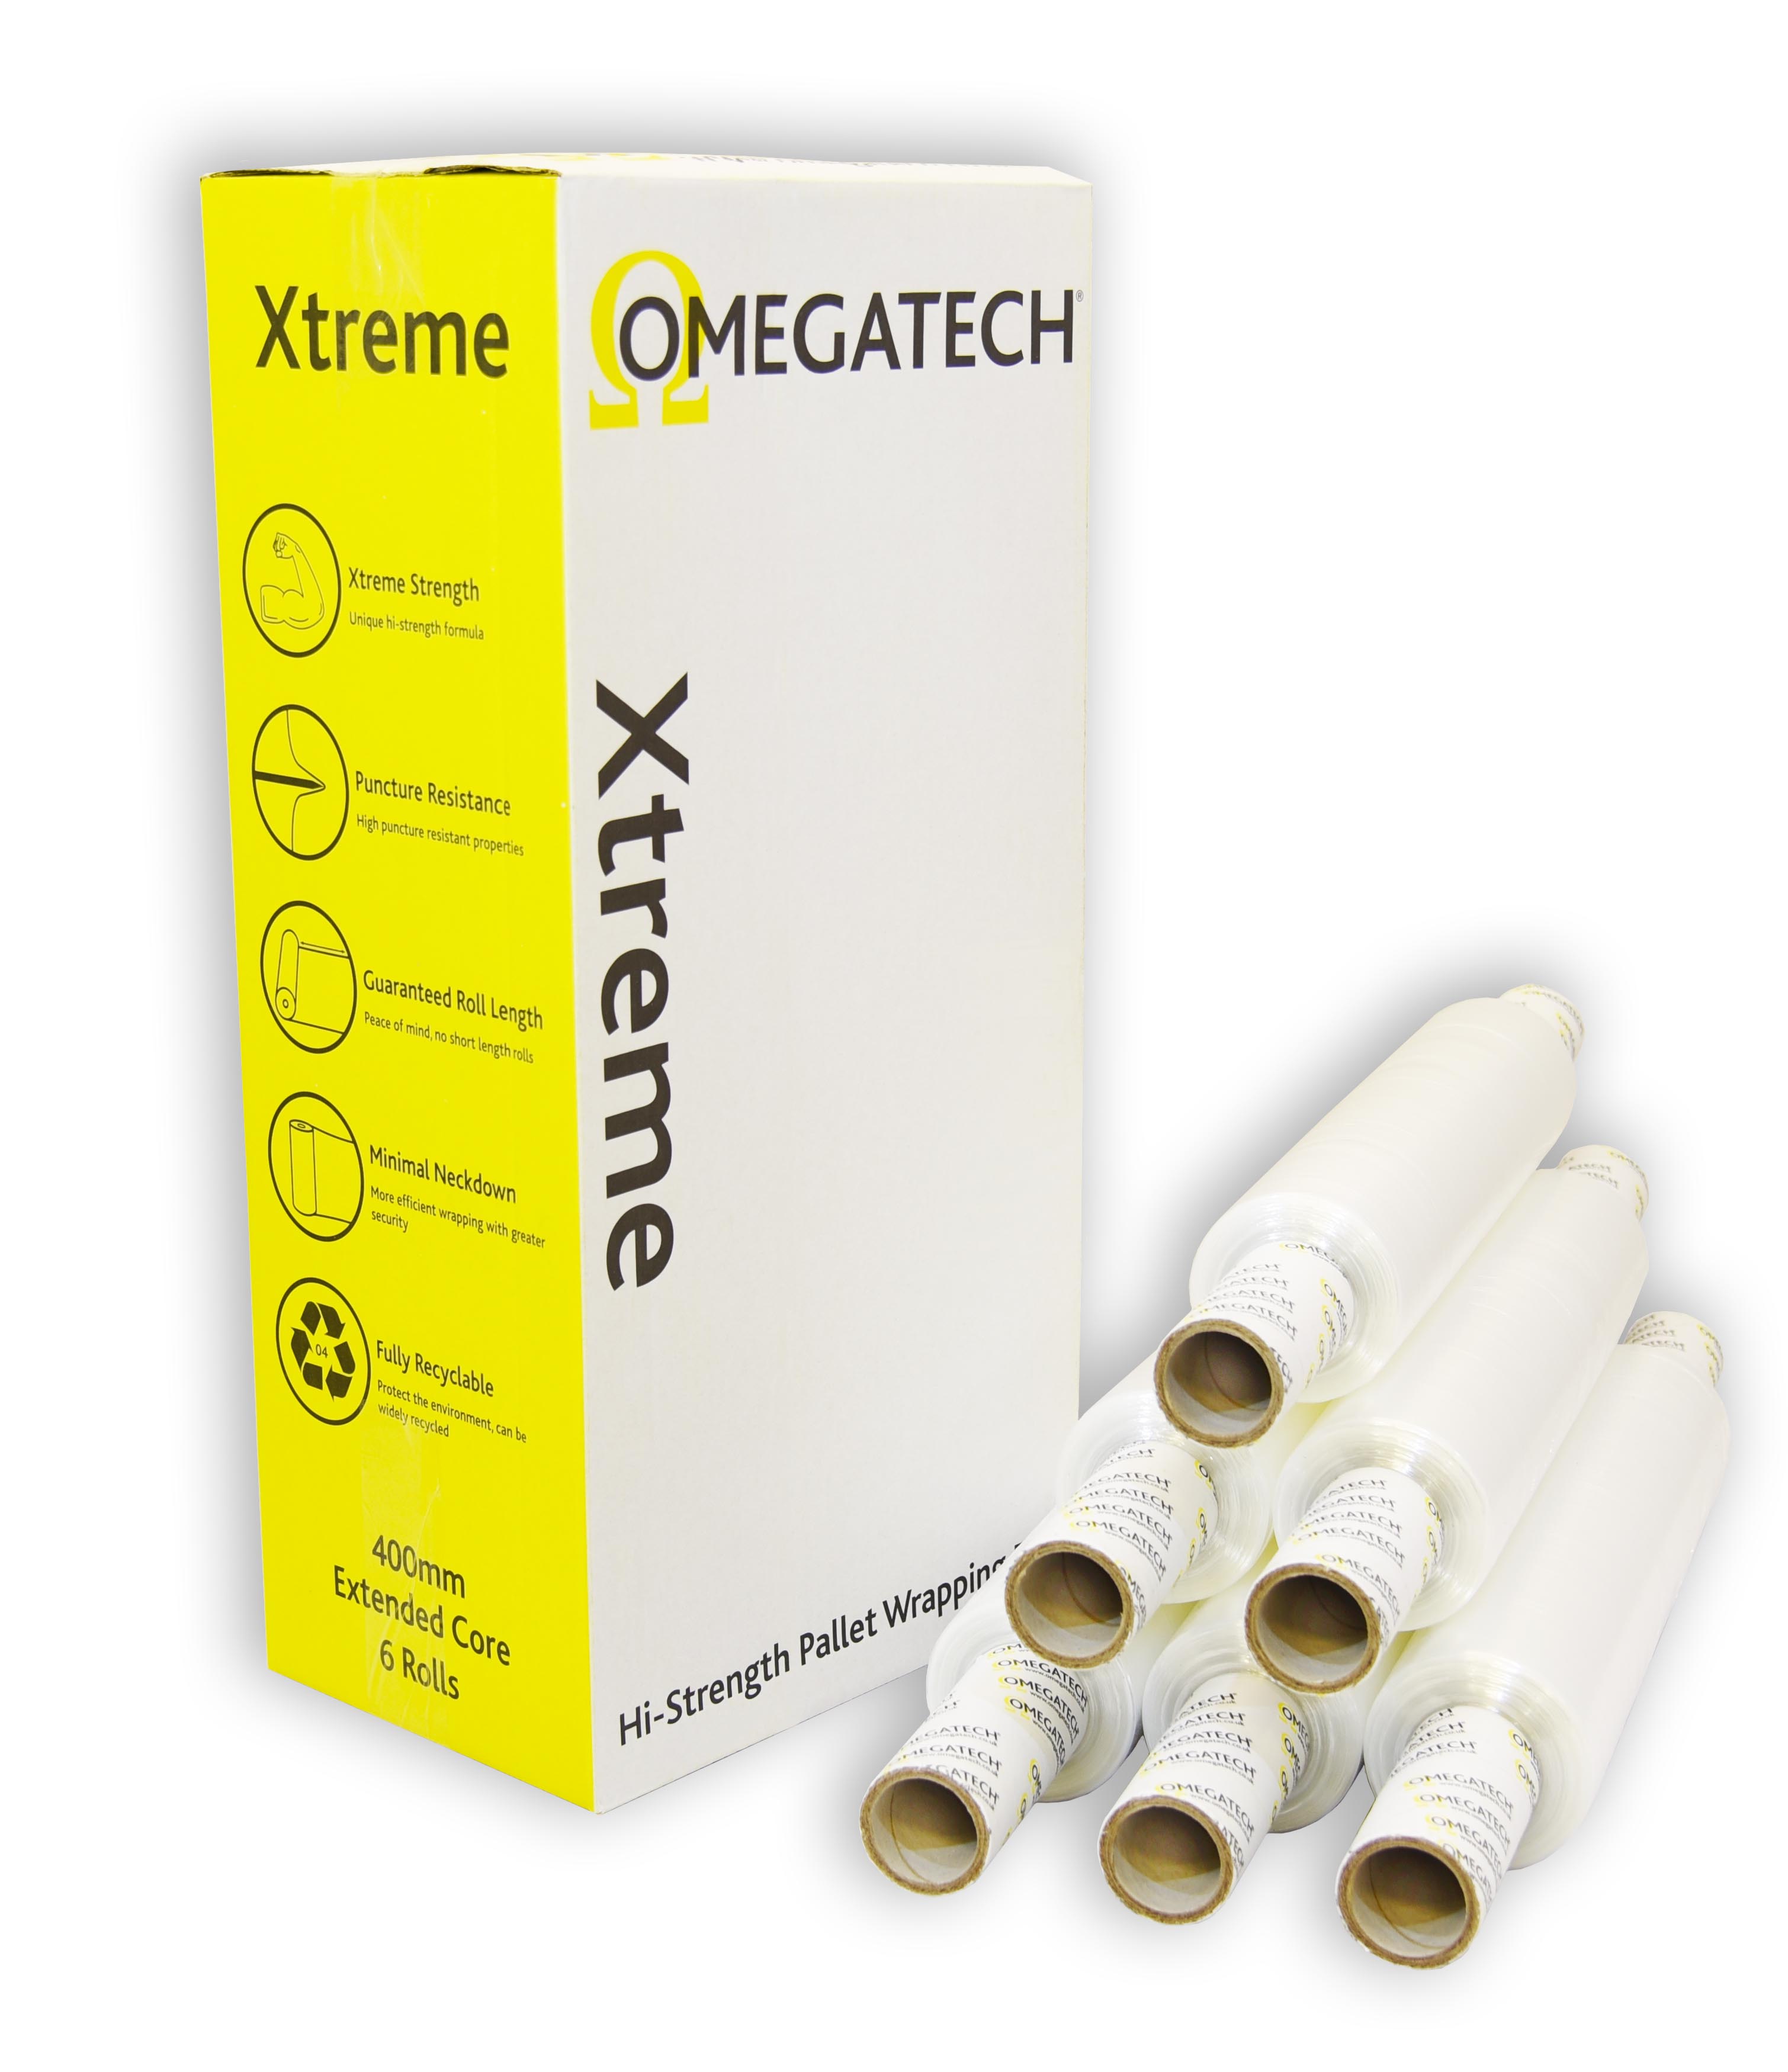 Omegatech Xtreme 40 High Strength Pallet Wrapping Stretch Film